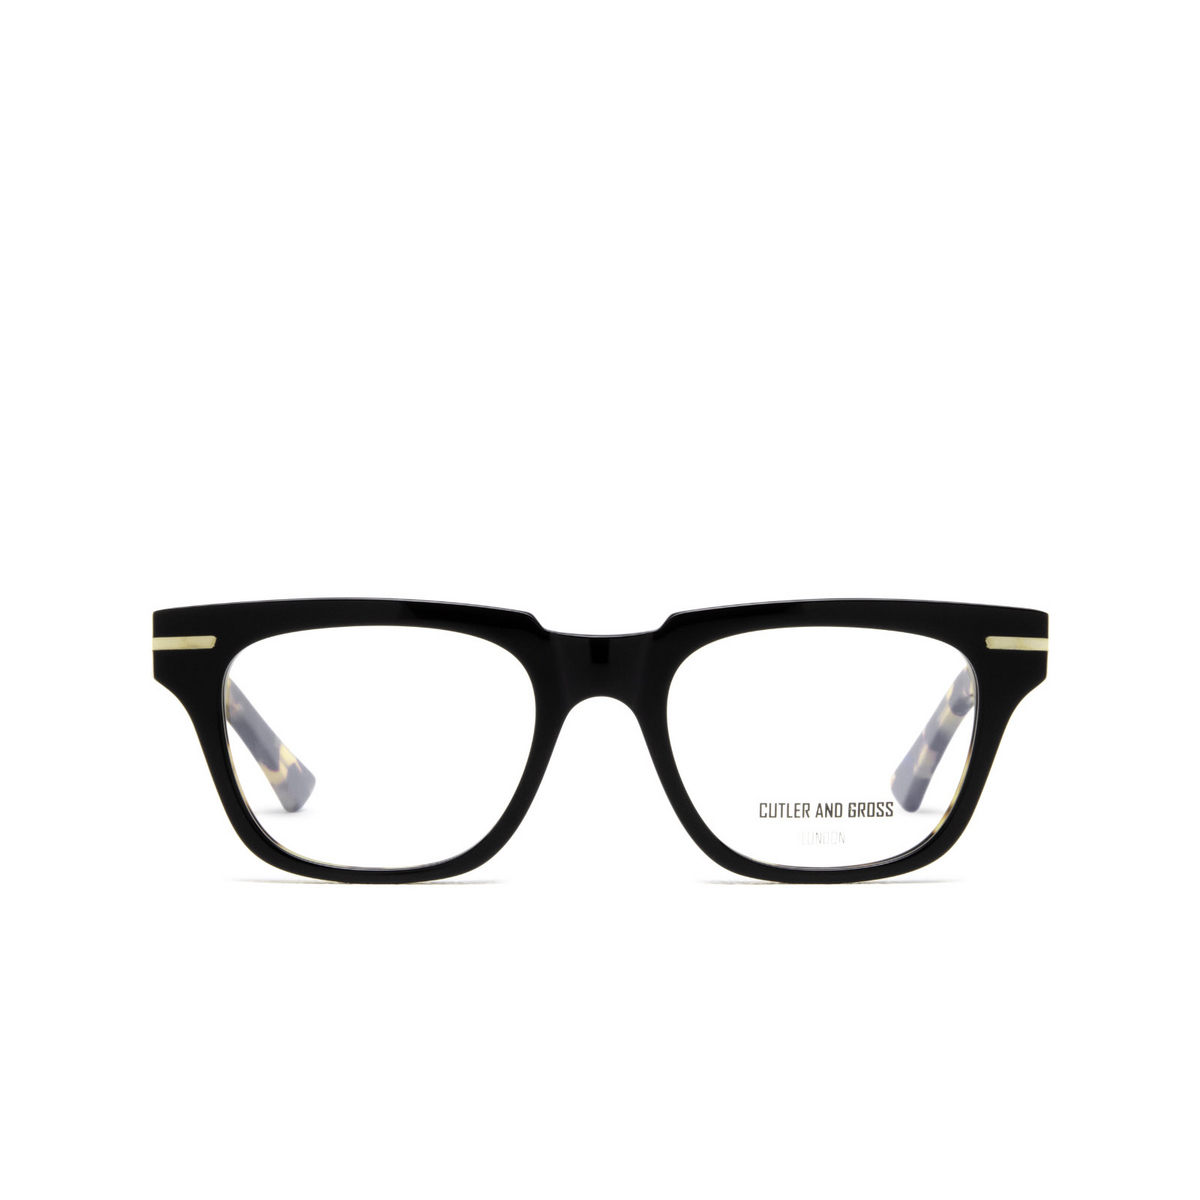 Cutler and Gross 1355 Eyeglasses 04 Black Taxi on Camo - front view